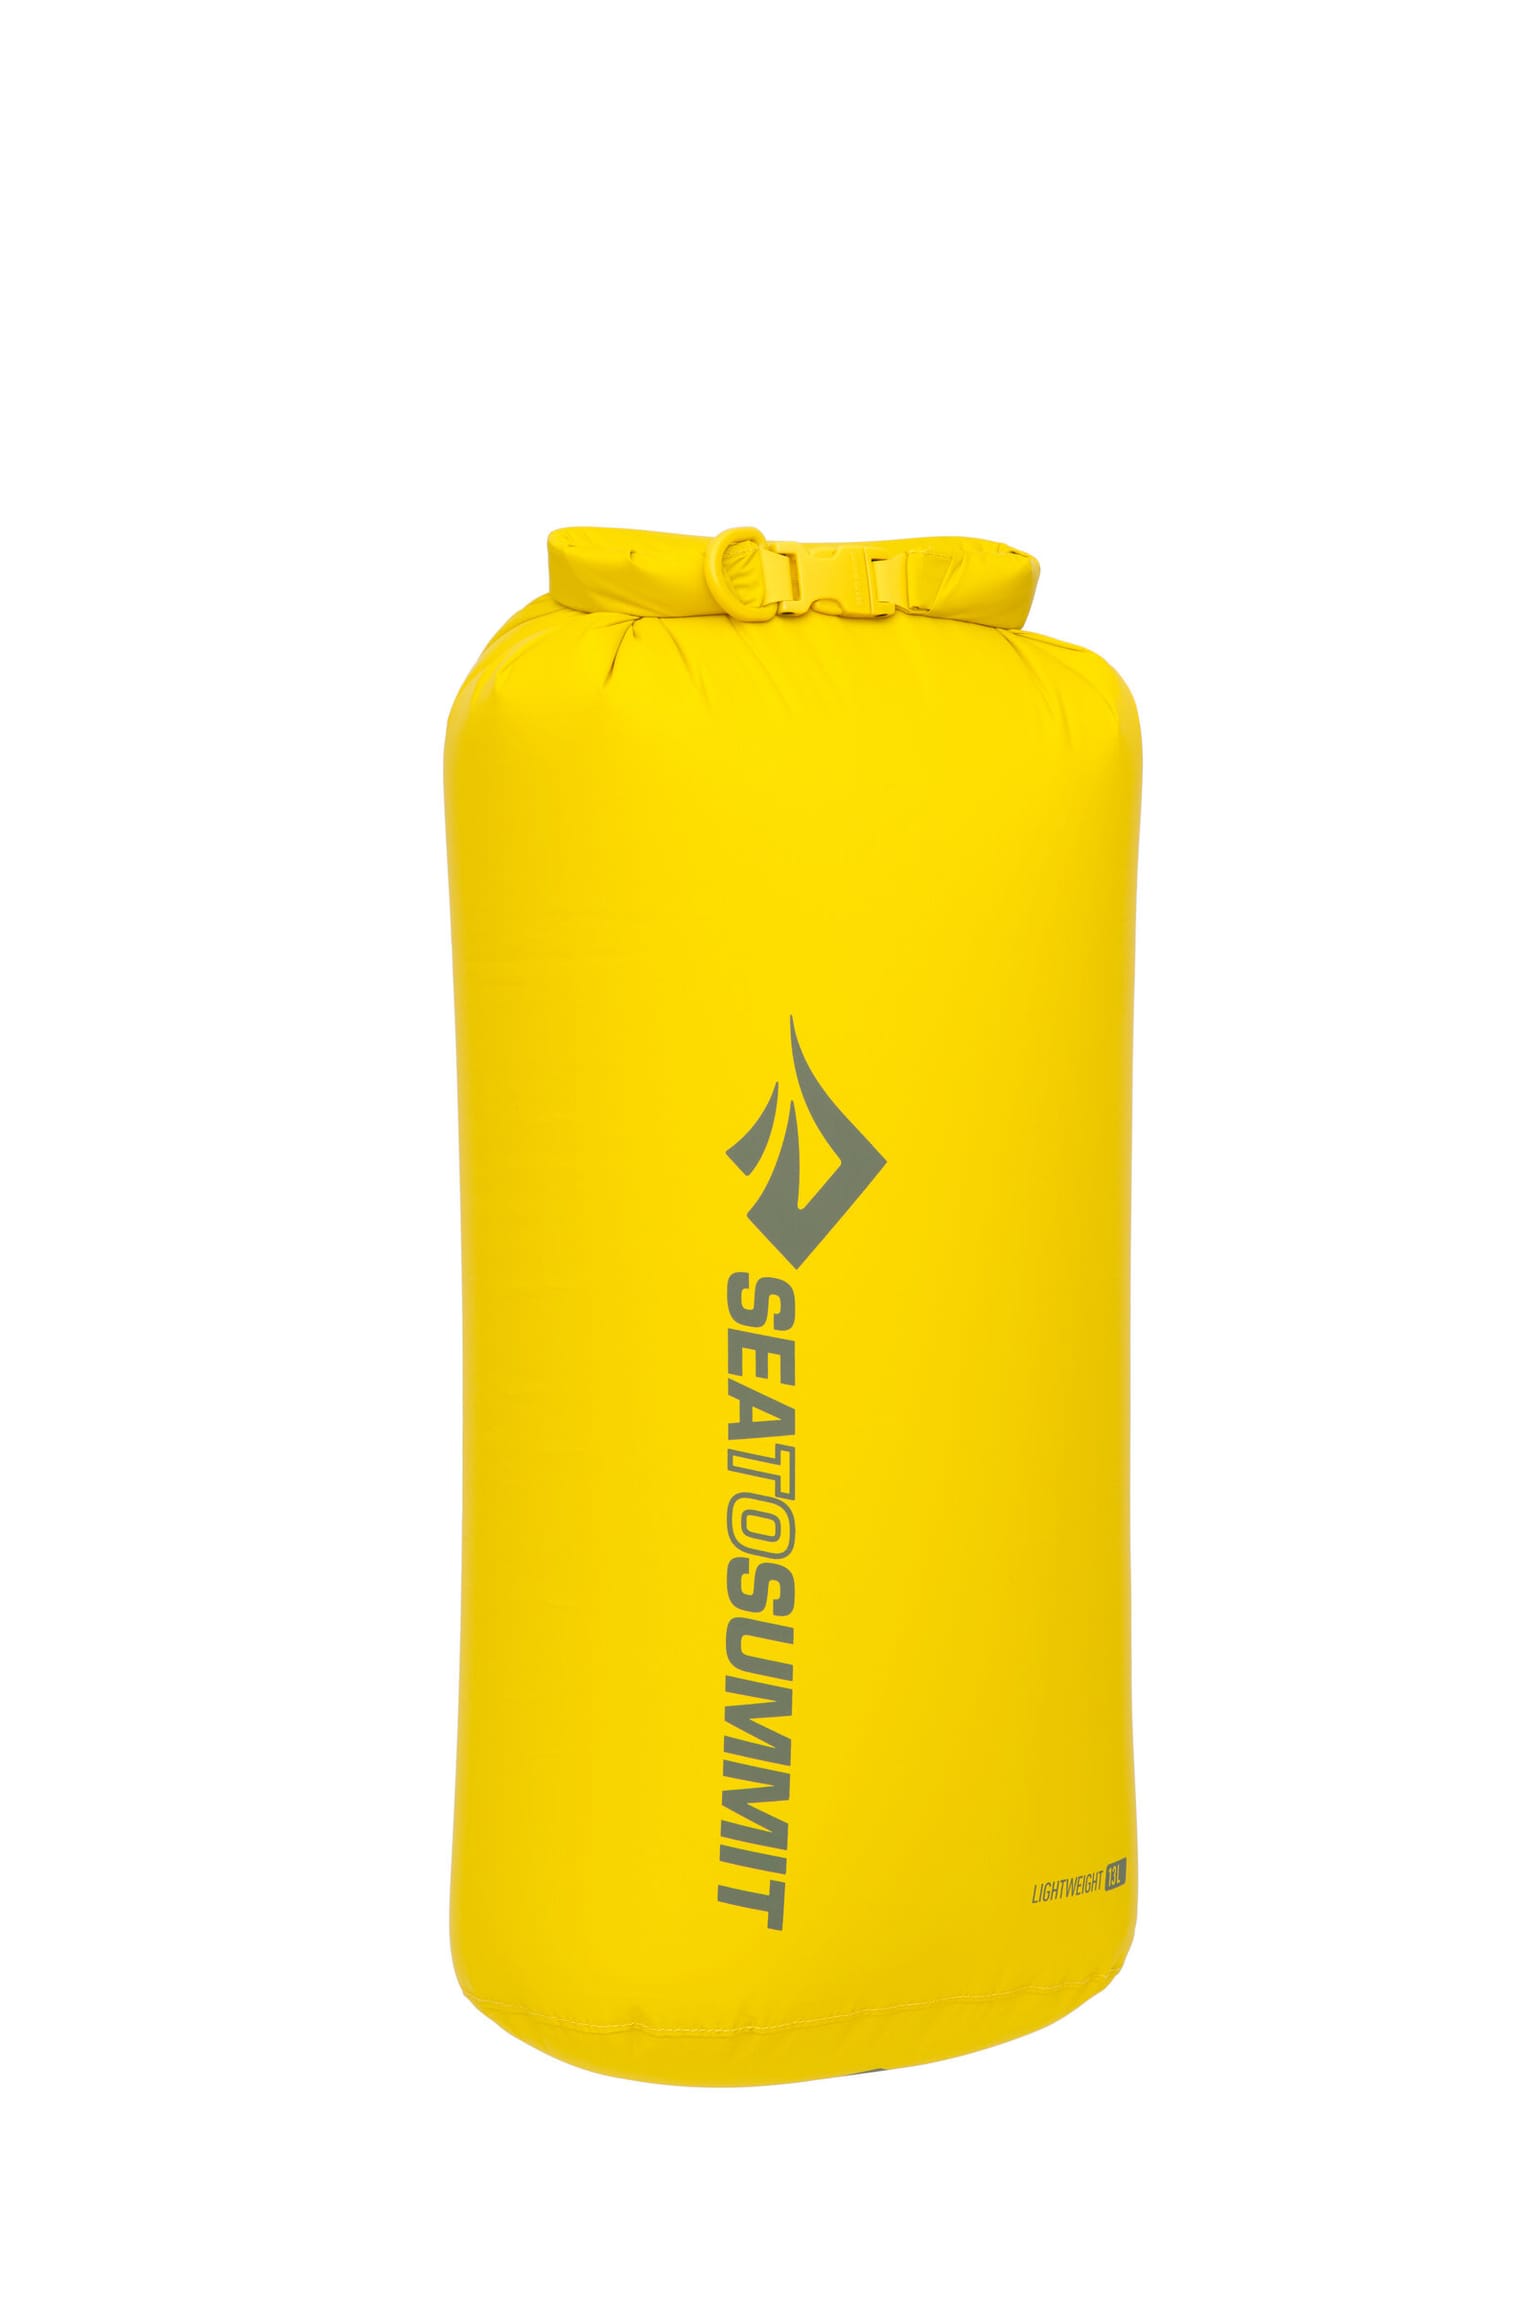 Sea To Summit Sea To Summit Lightweight Dry Bag 13L Dry Bag ocre 1